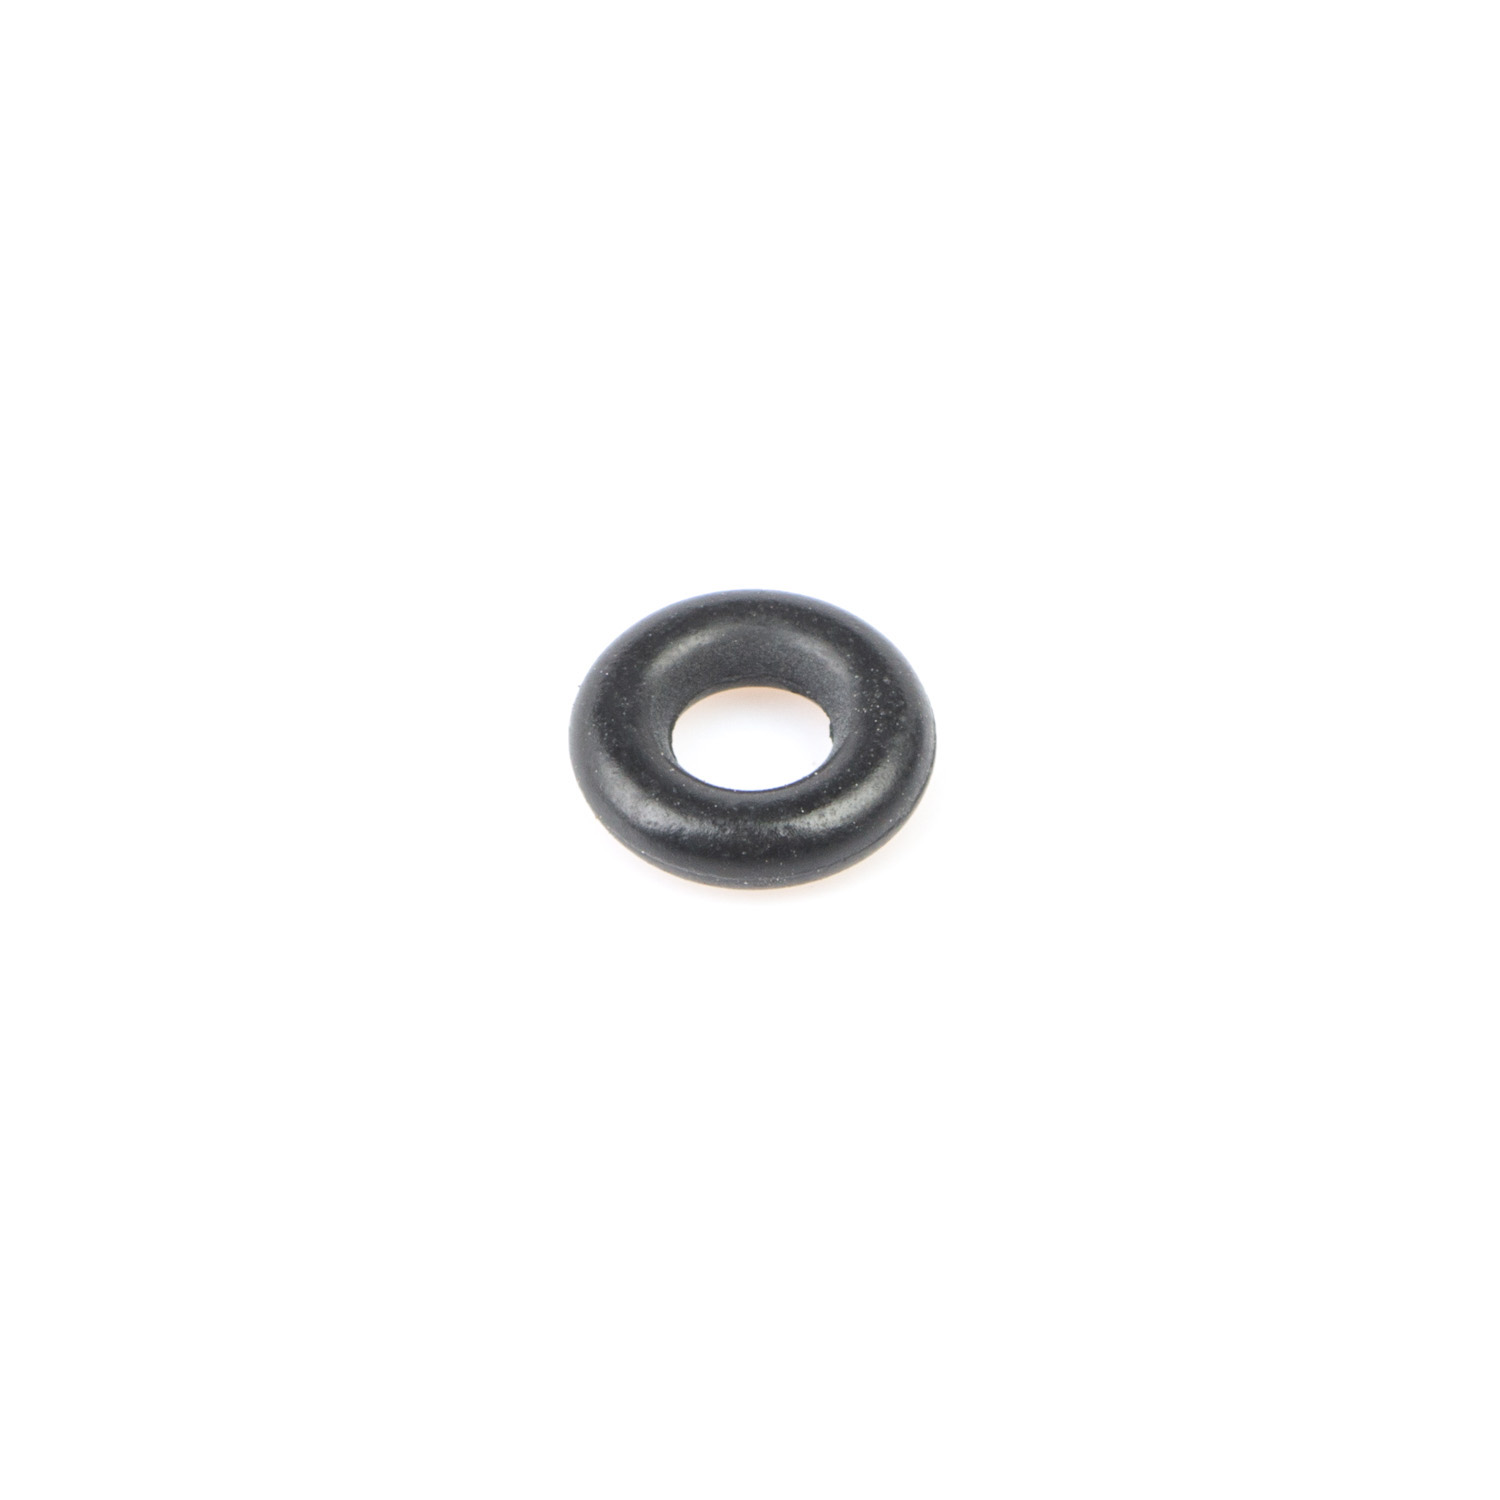 DT125MX Carb Idle Screw O-Ring